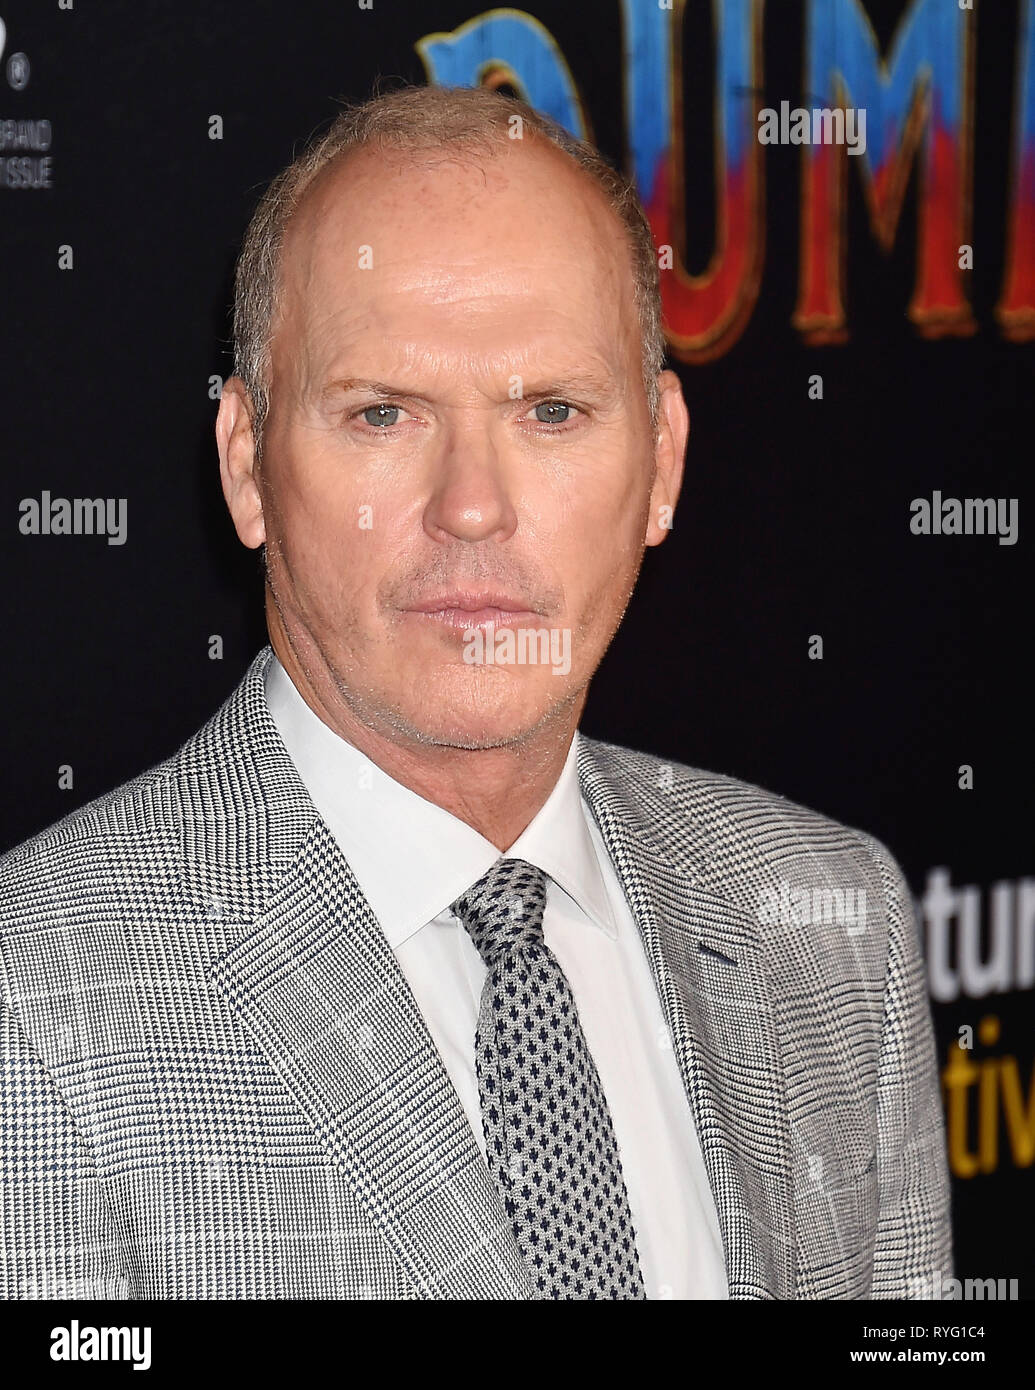 MICHAEL KEATON American film actor at the premiere of Disney's 'Dumbo' at El Capitan Theatre on March 11, 2019 in Los Angeles, California. Stock Photo